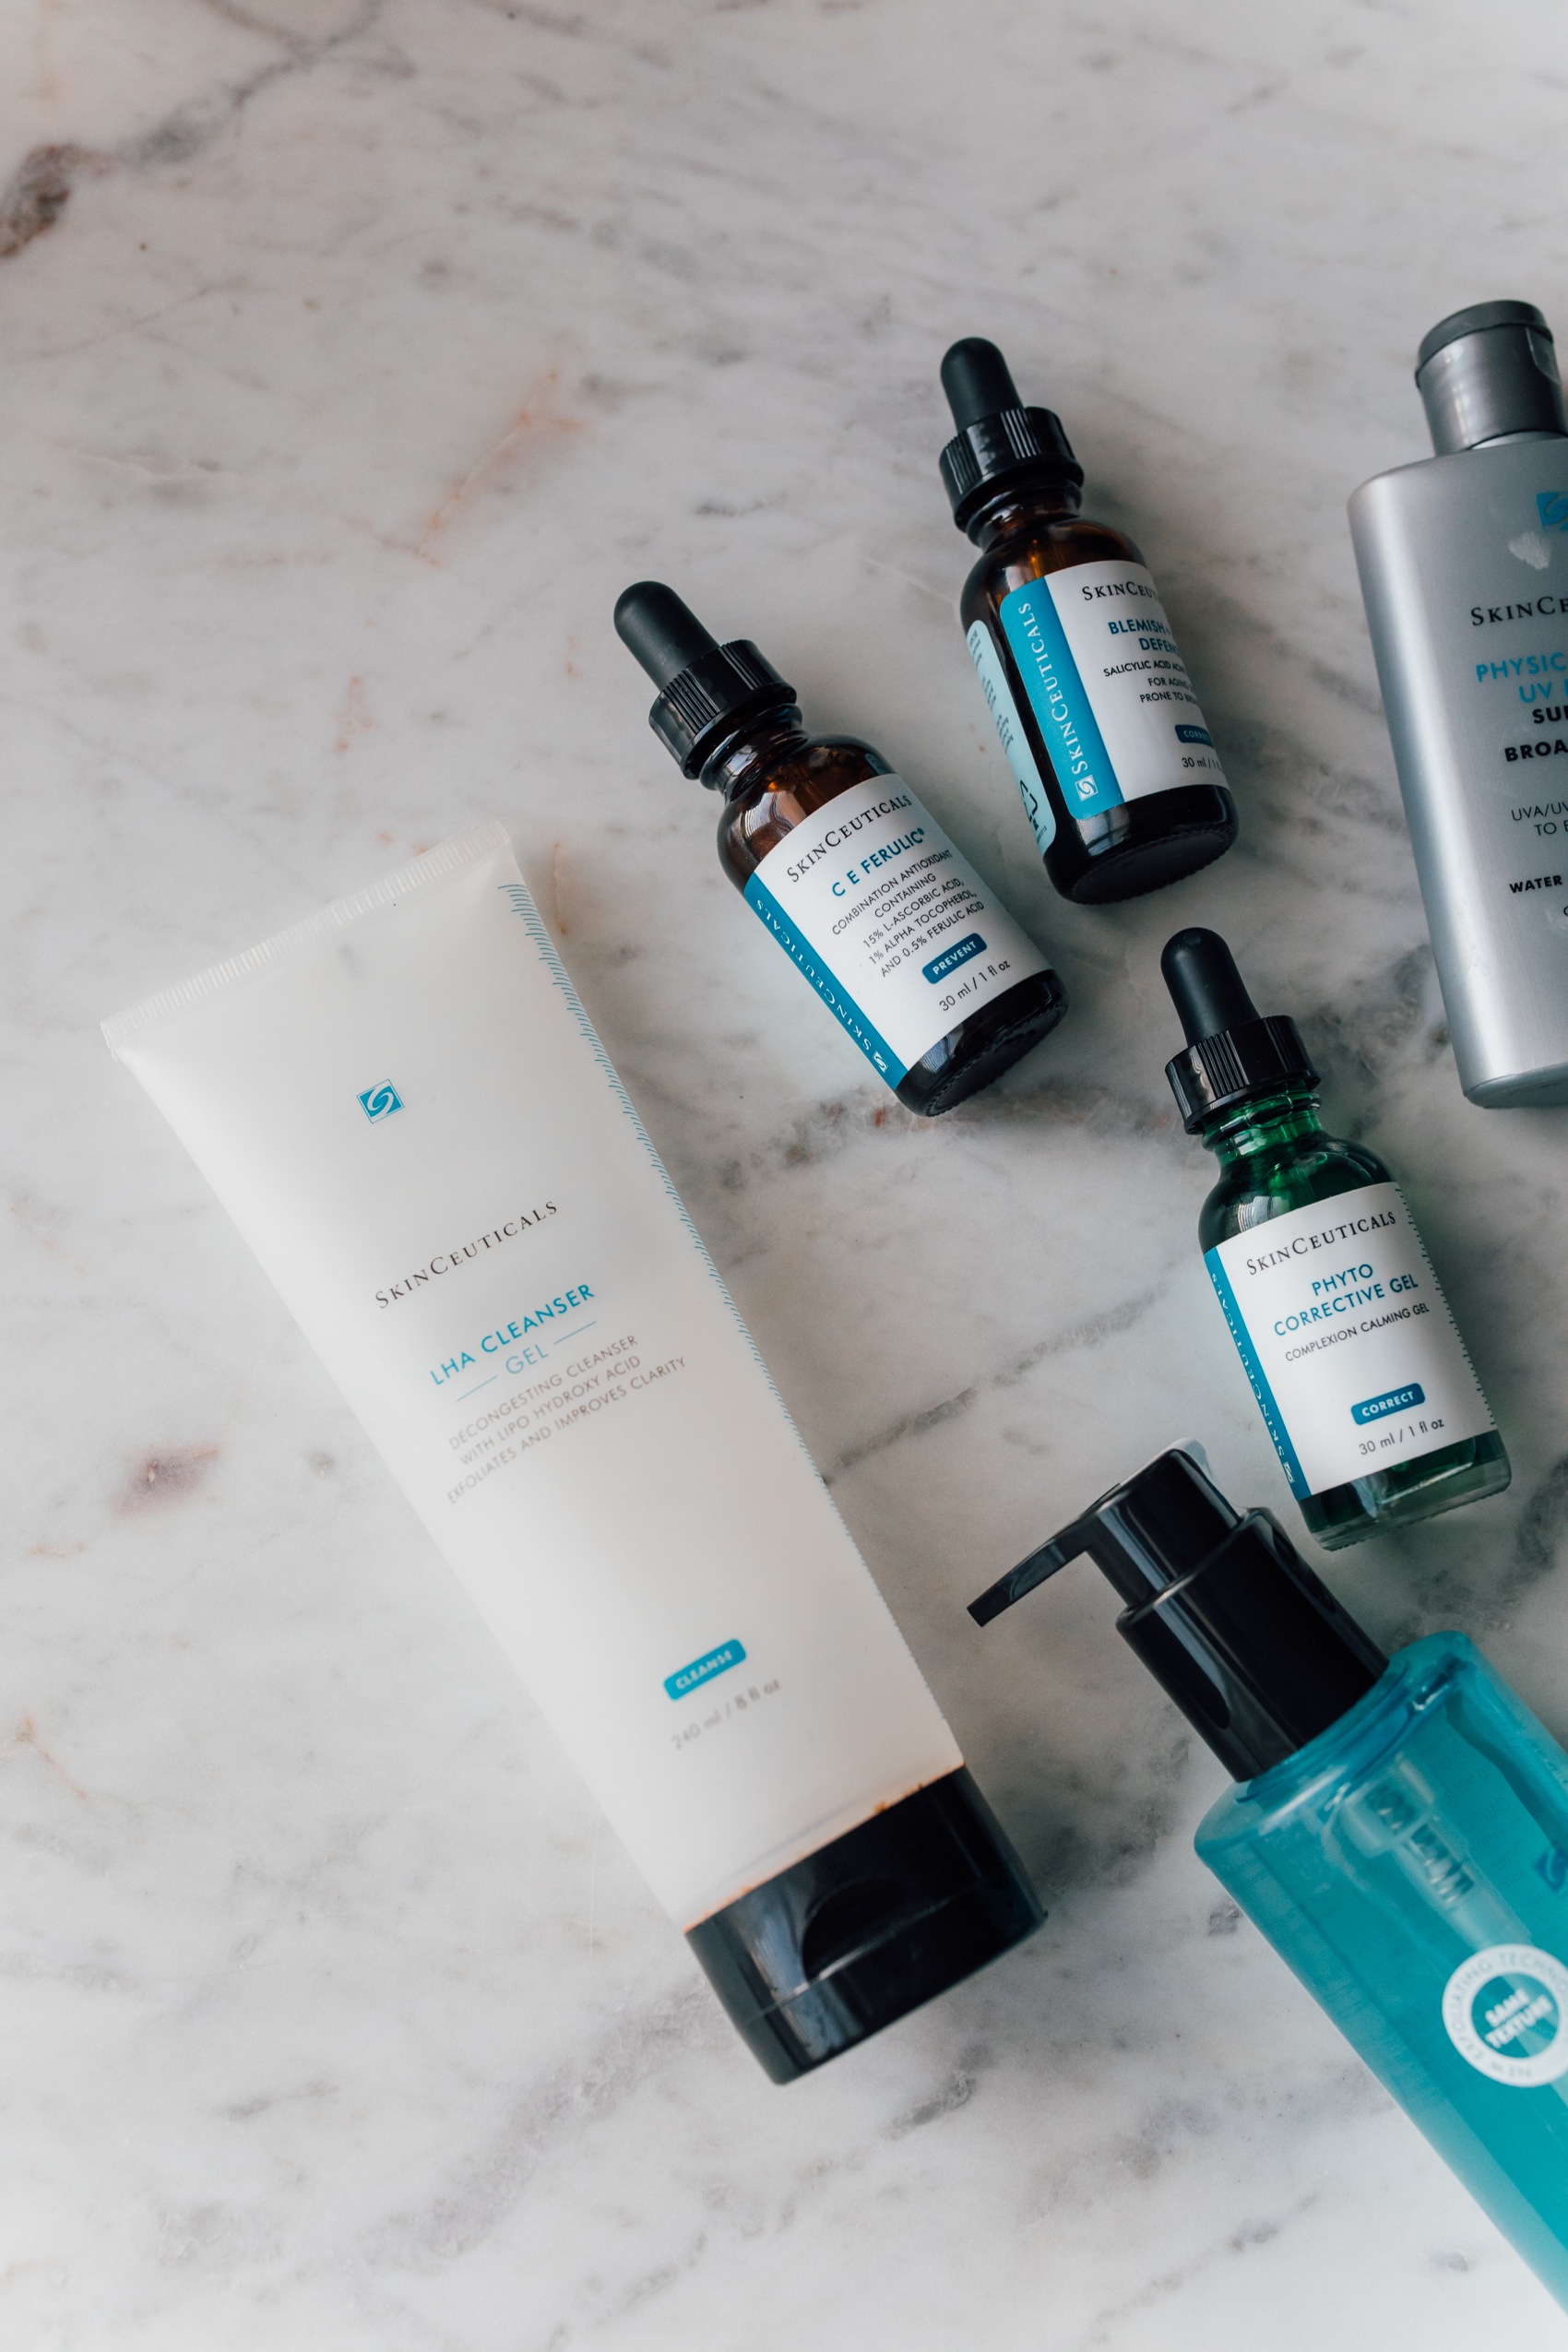 The Skinceuticals products I swear by